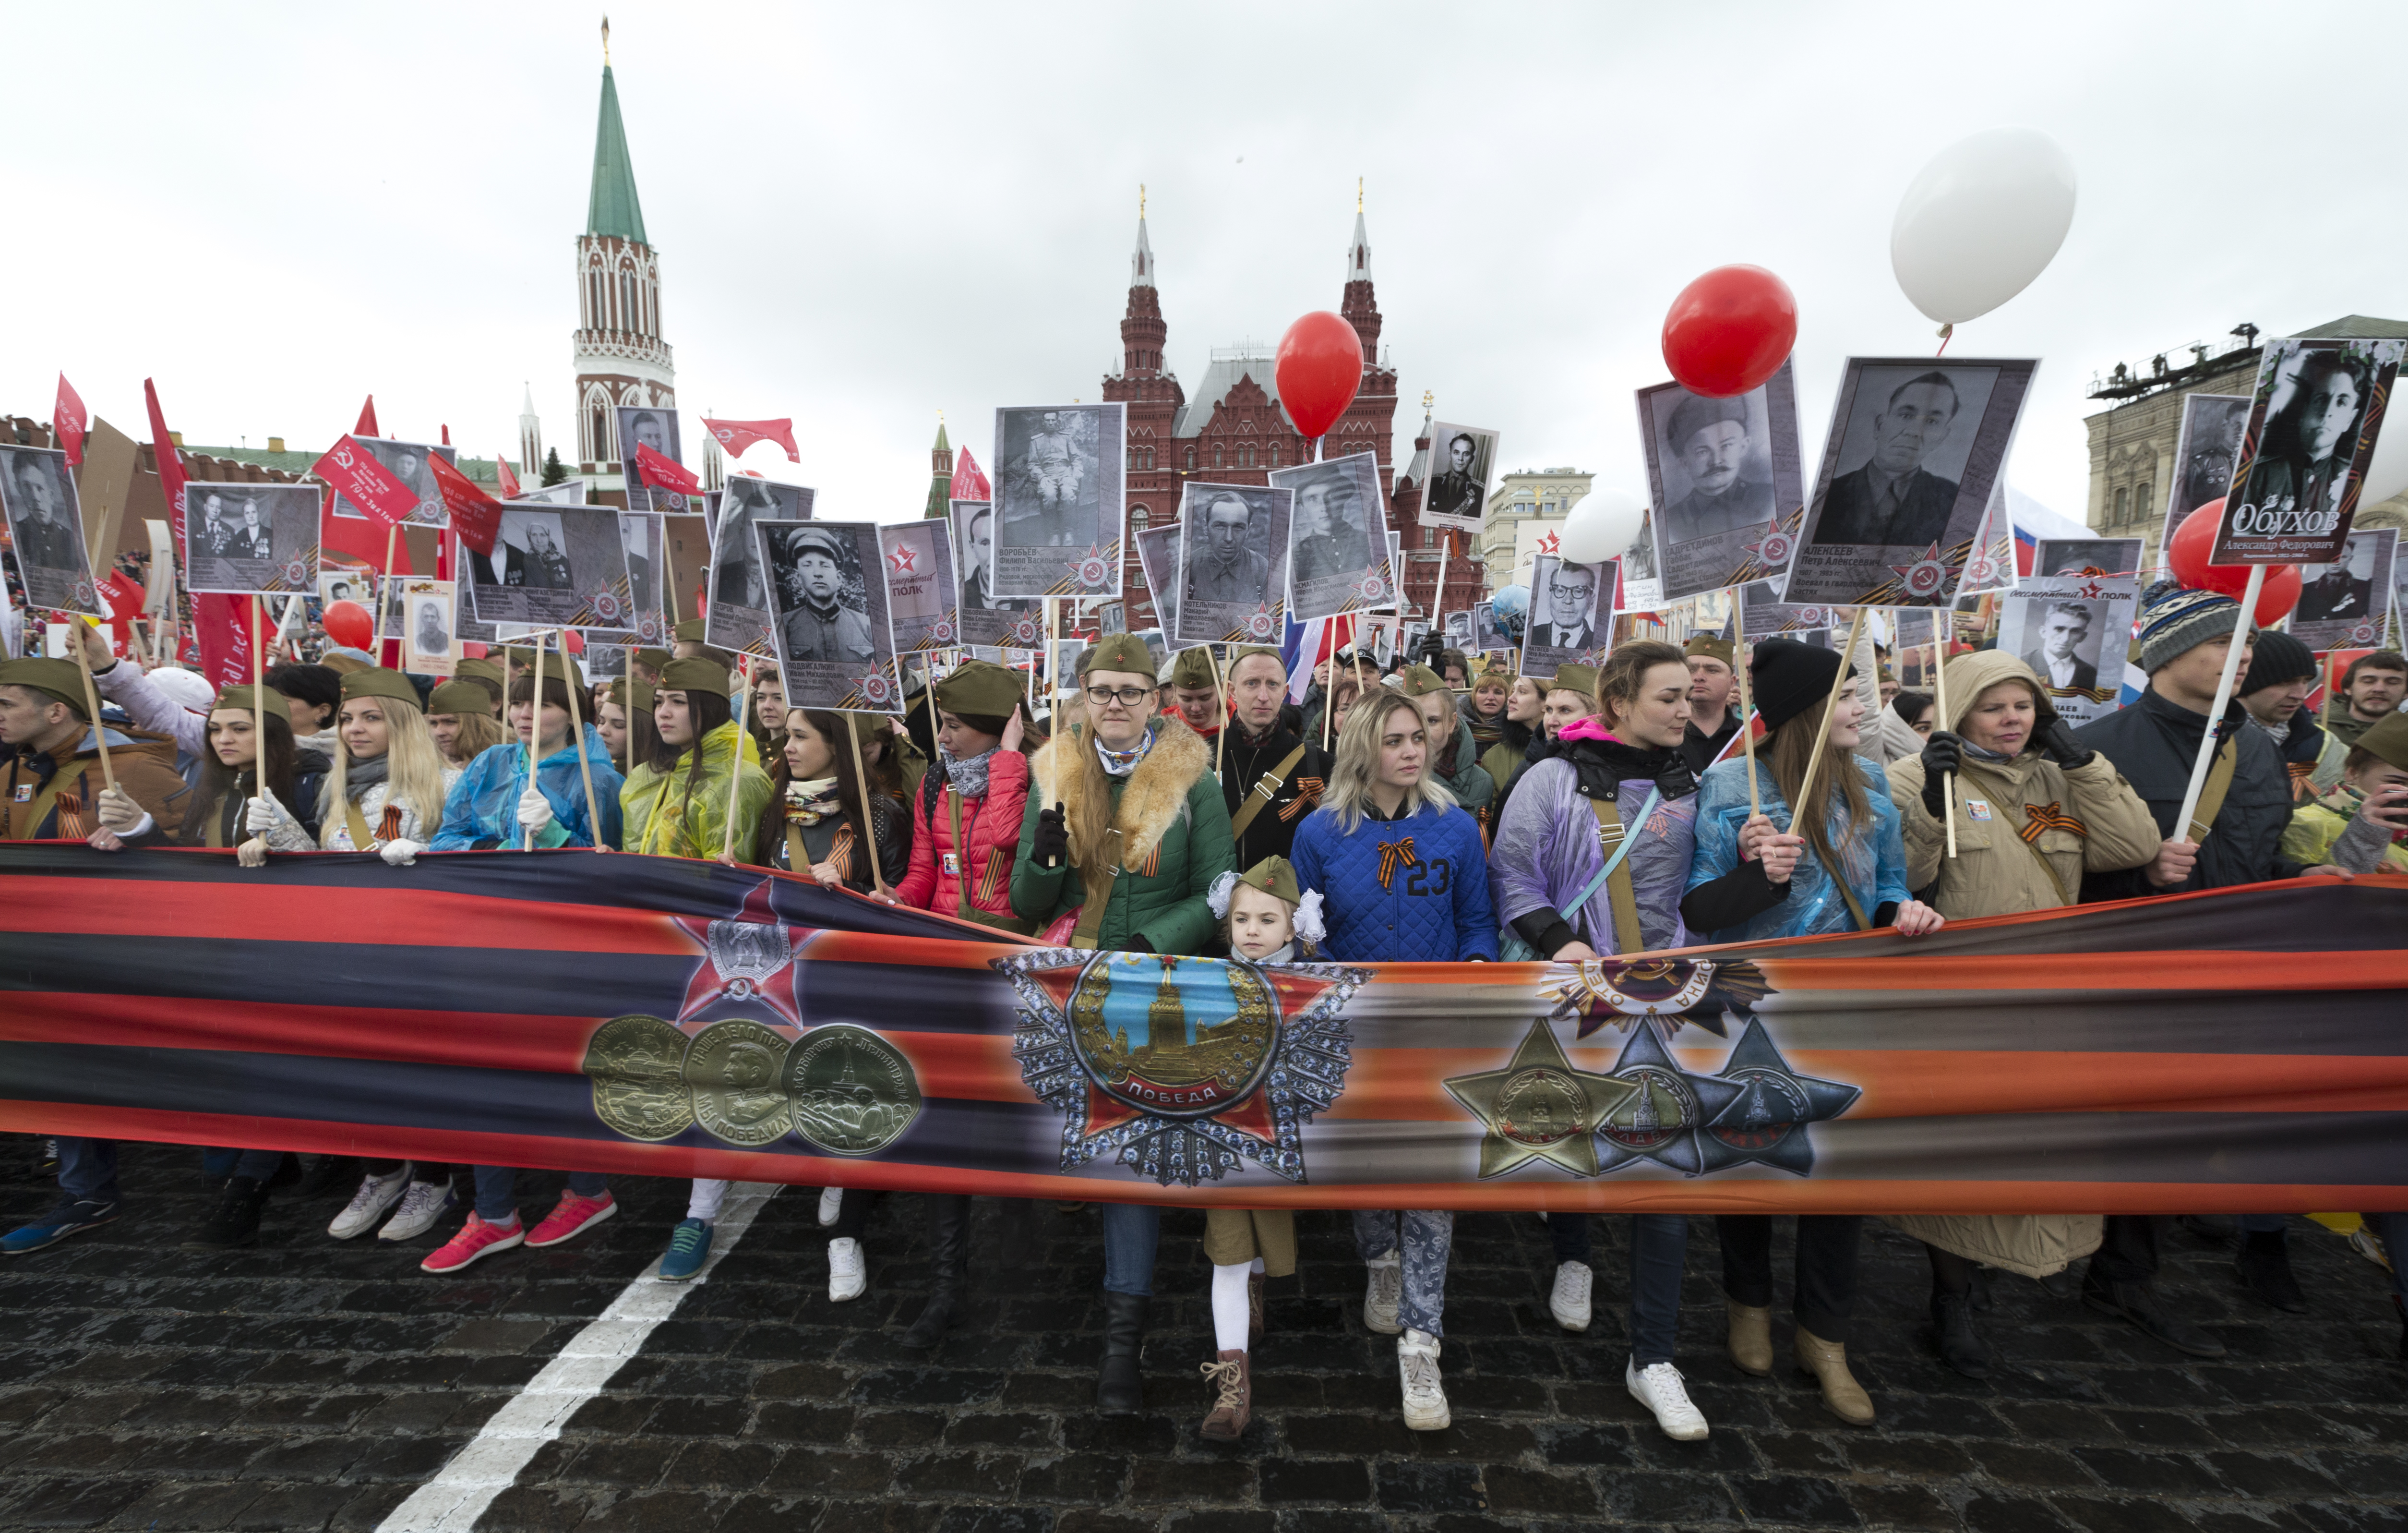 People carry portraits of relatives who fought in World War II,  with Russian and Soviet flags, during the Immortal Regiment march at the Red Square in Moscow, Russia, on Tuesday, May 9, 2017, celebrating 72 years since the end of WWII and the defeat of Nazi Germany.(AP Photo/Ivan Sekretarev)